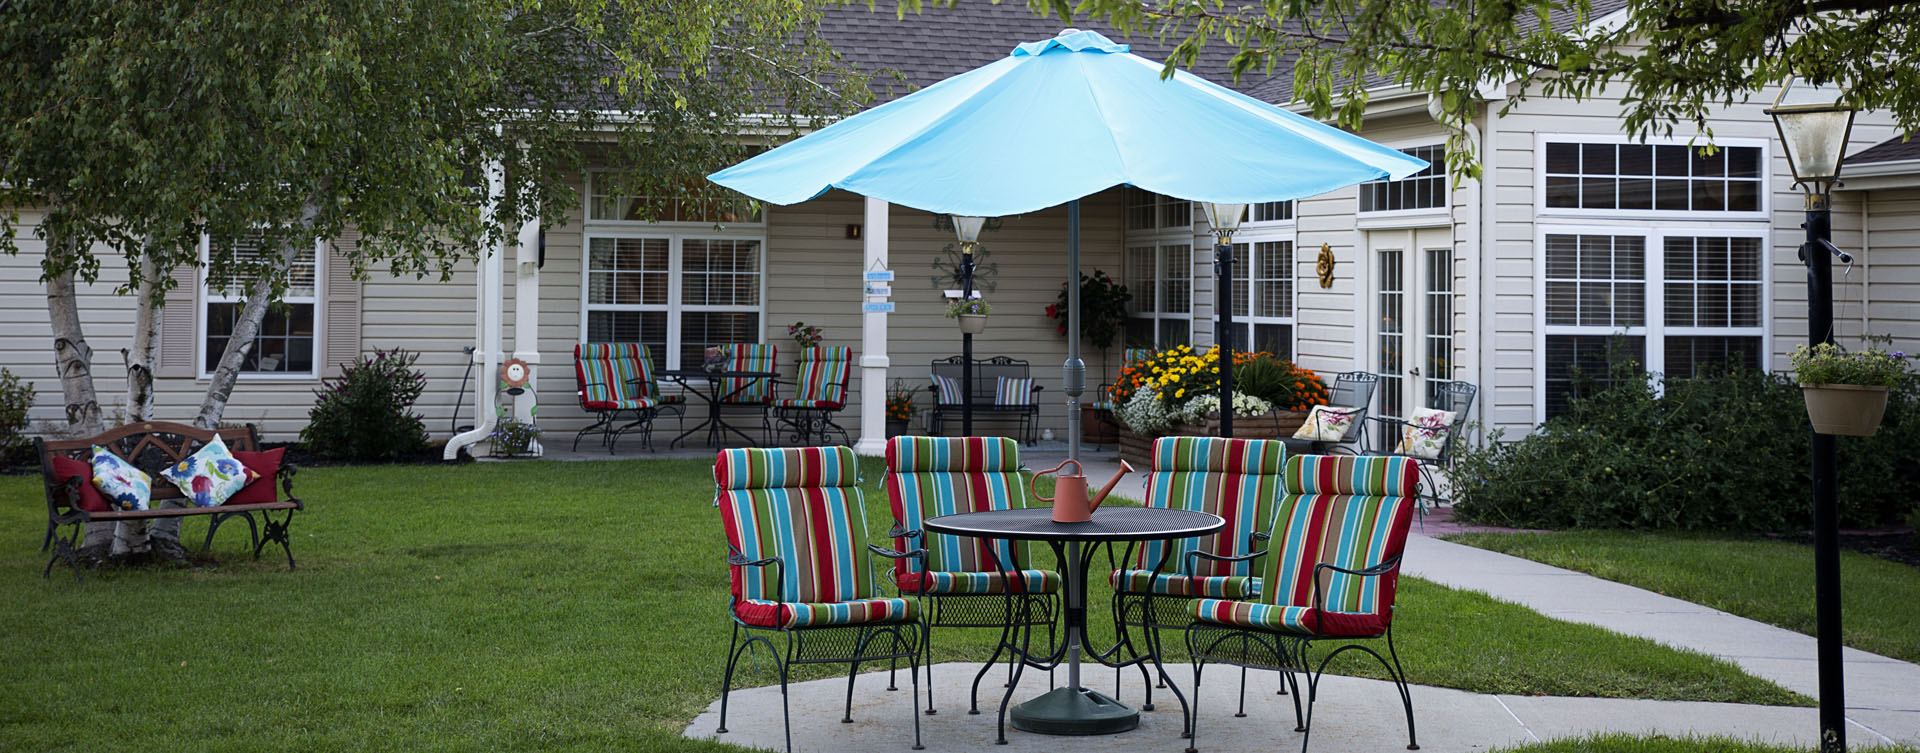 Enjoy bird watching, gardening and barbecuing in our courtyard at Bickford of Grand Island